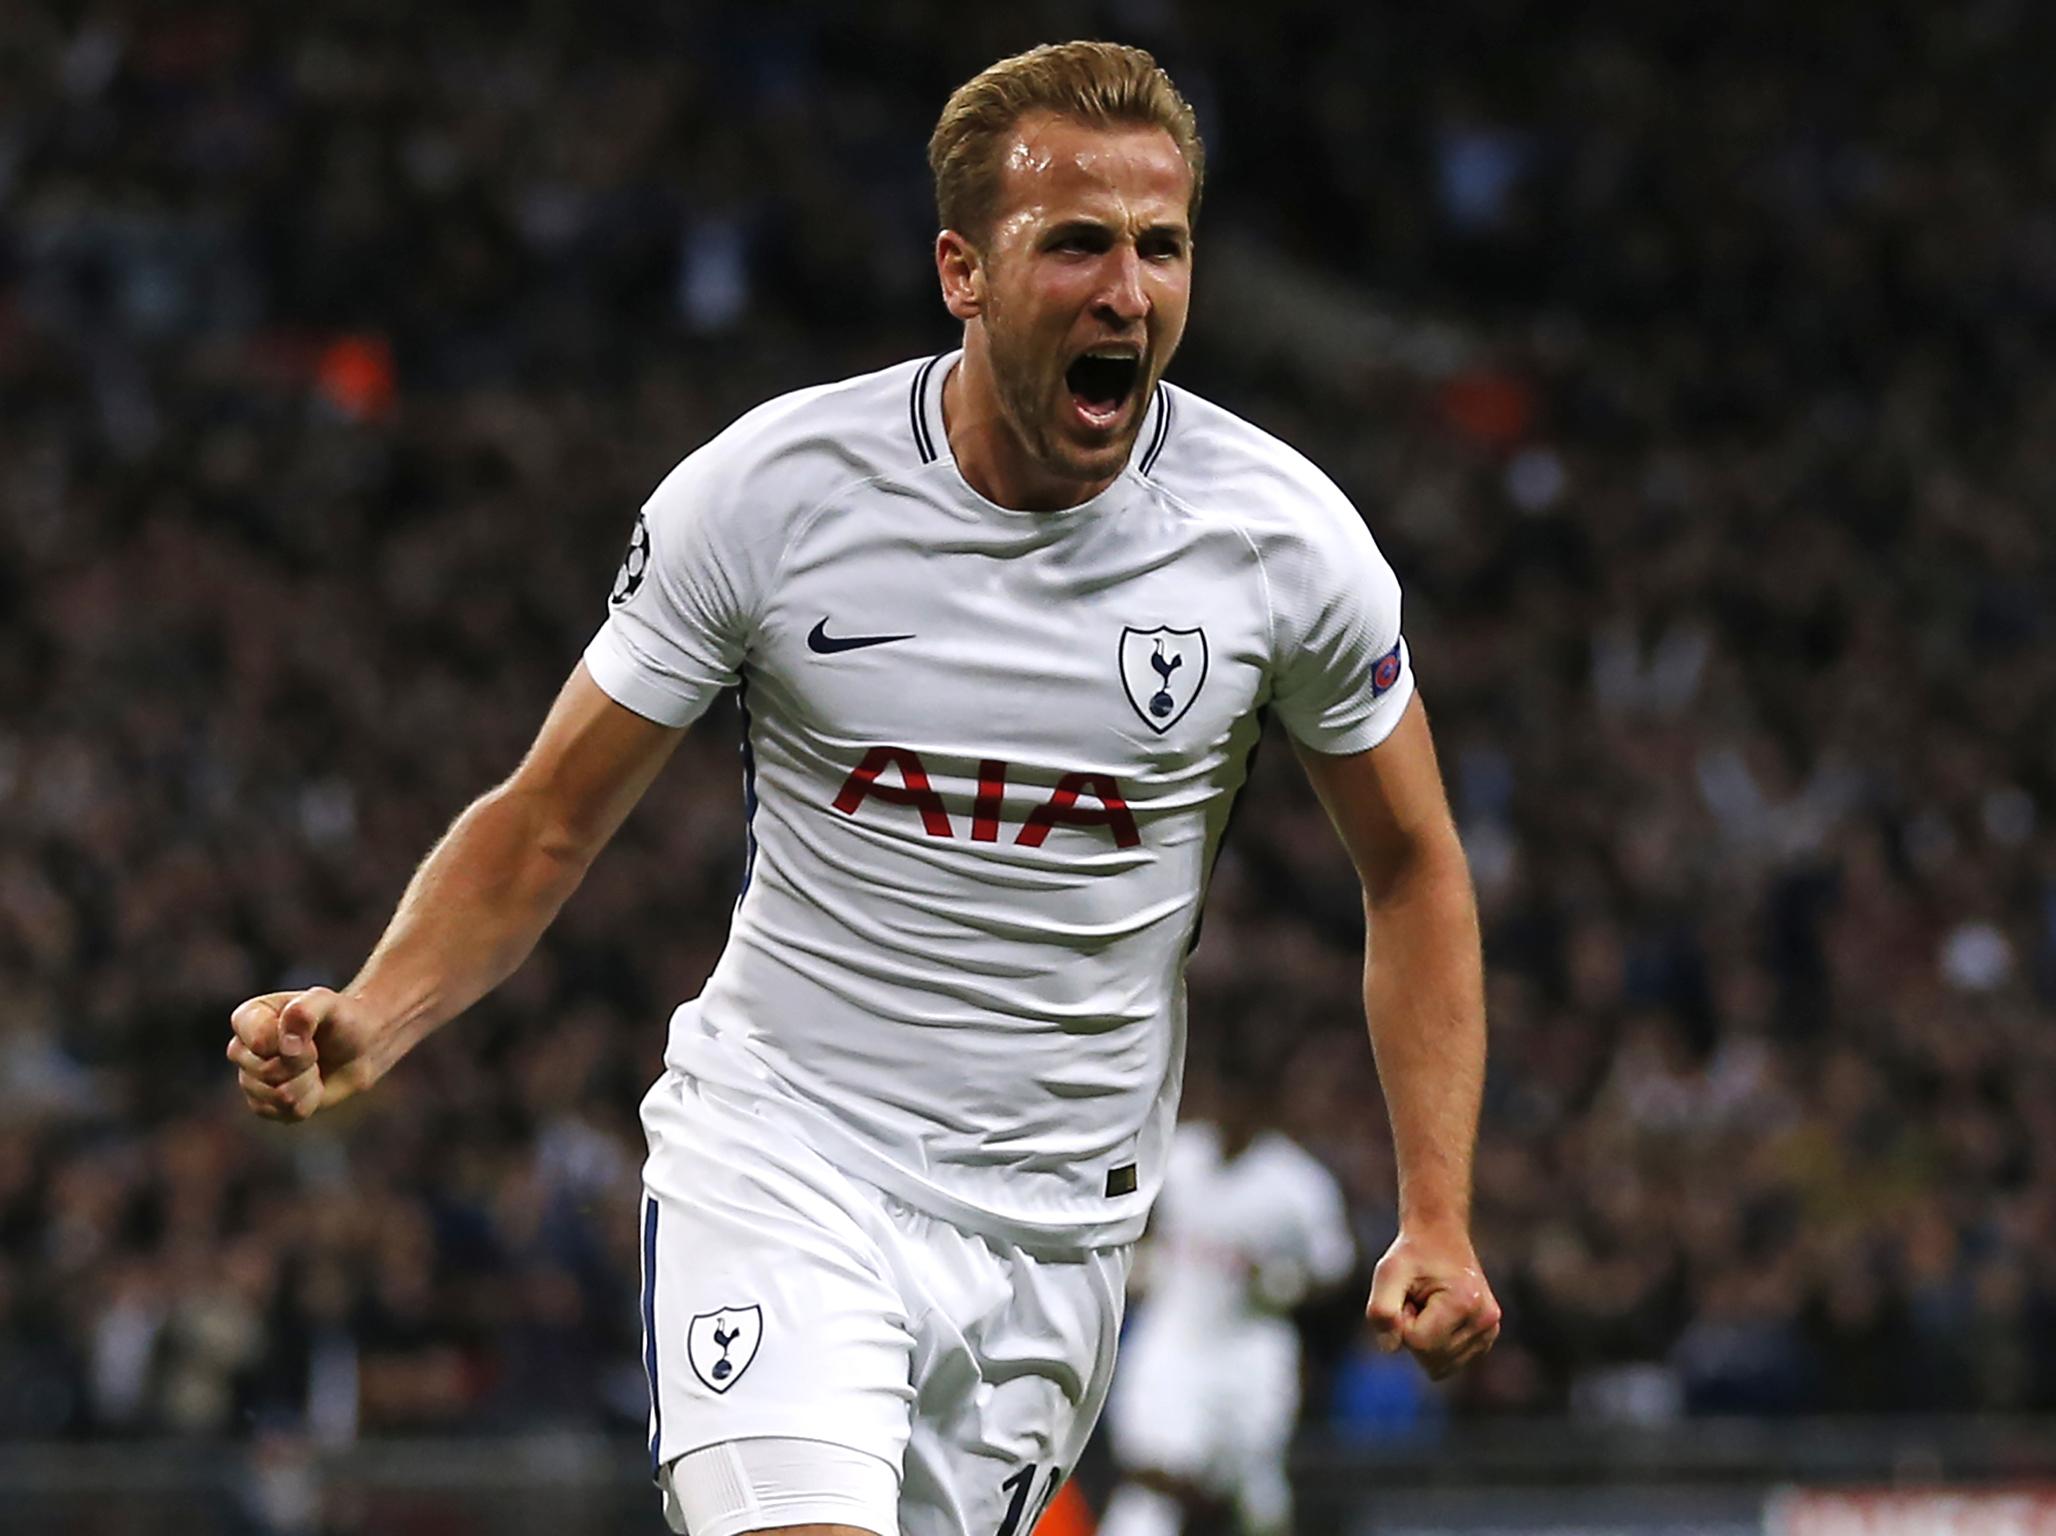 Harry Kane has grown into one of the most feared strikers in Europe